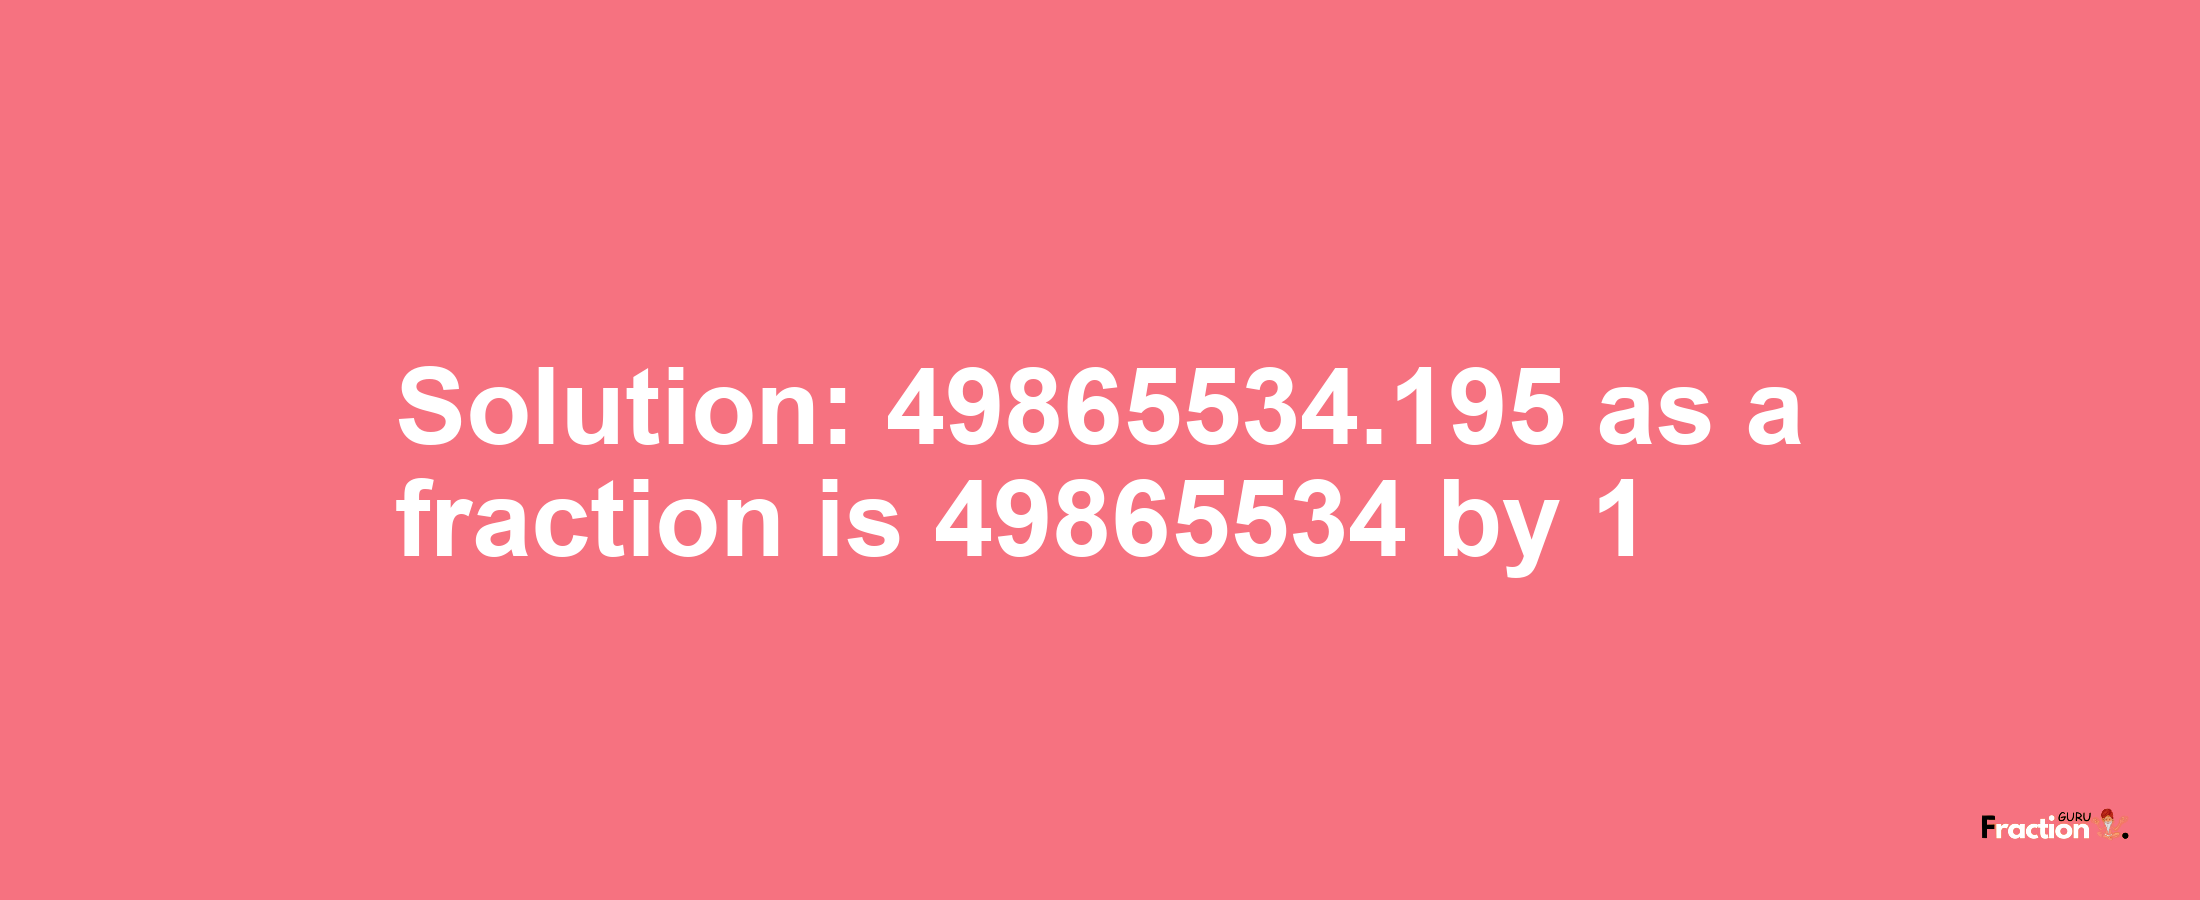 Solution:49865534.195 as a fraction is 49865534/1